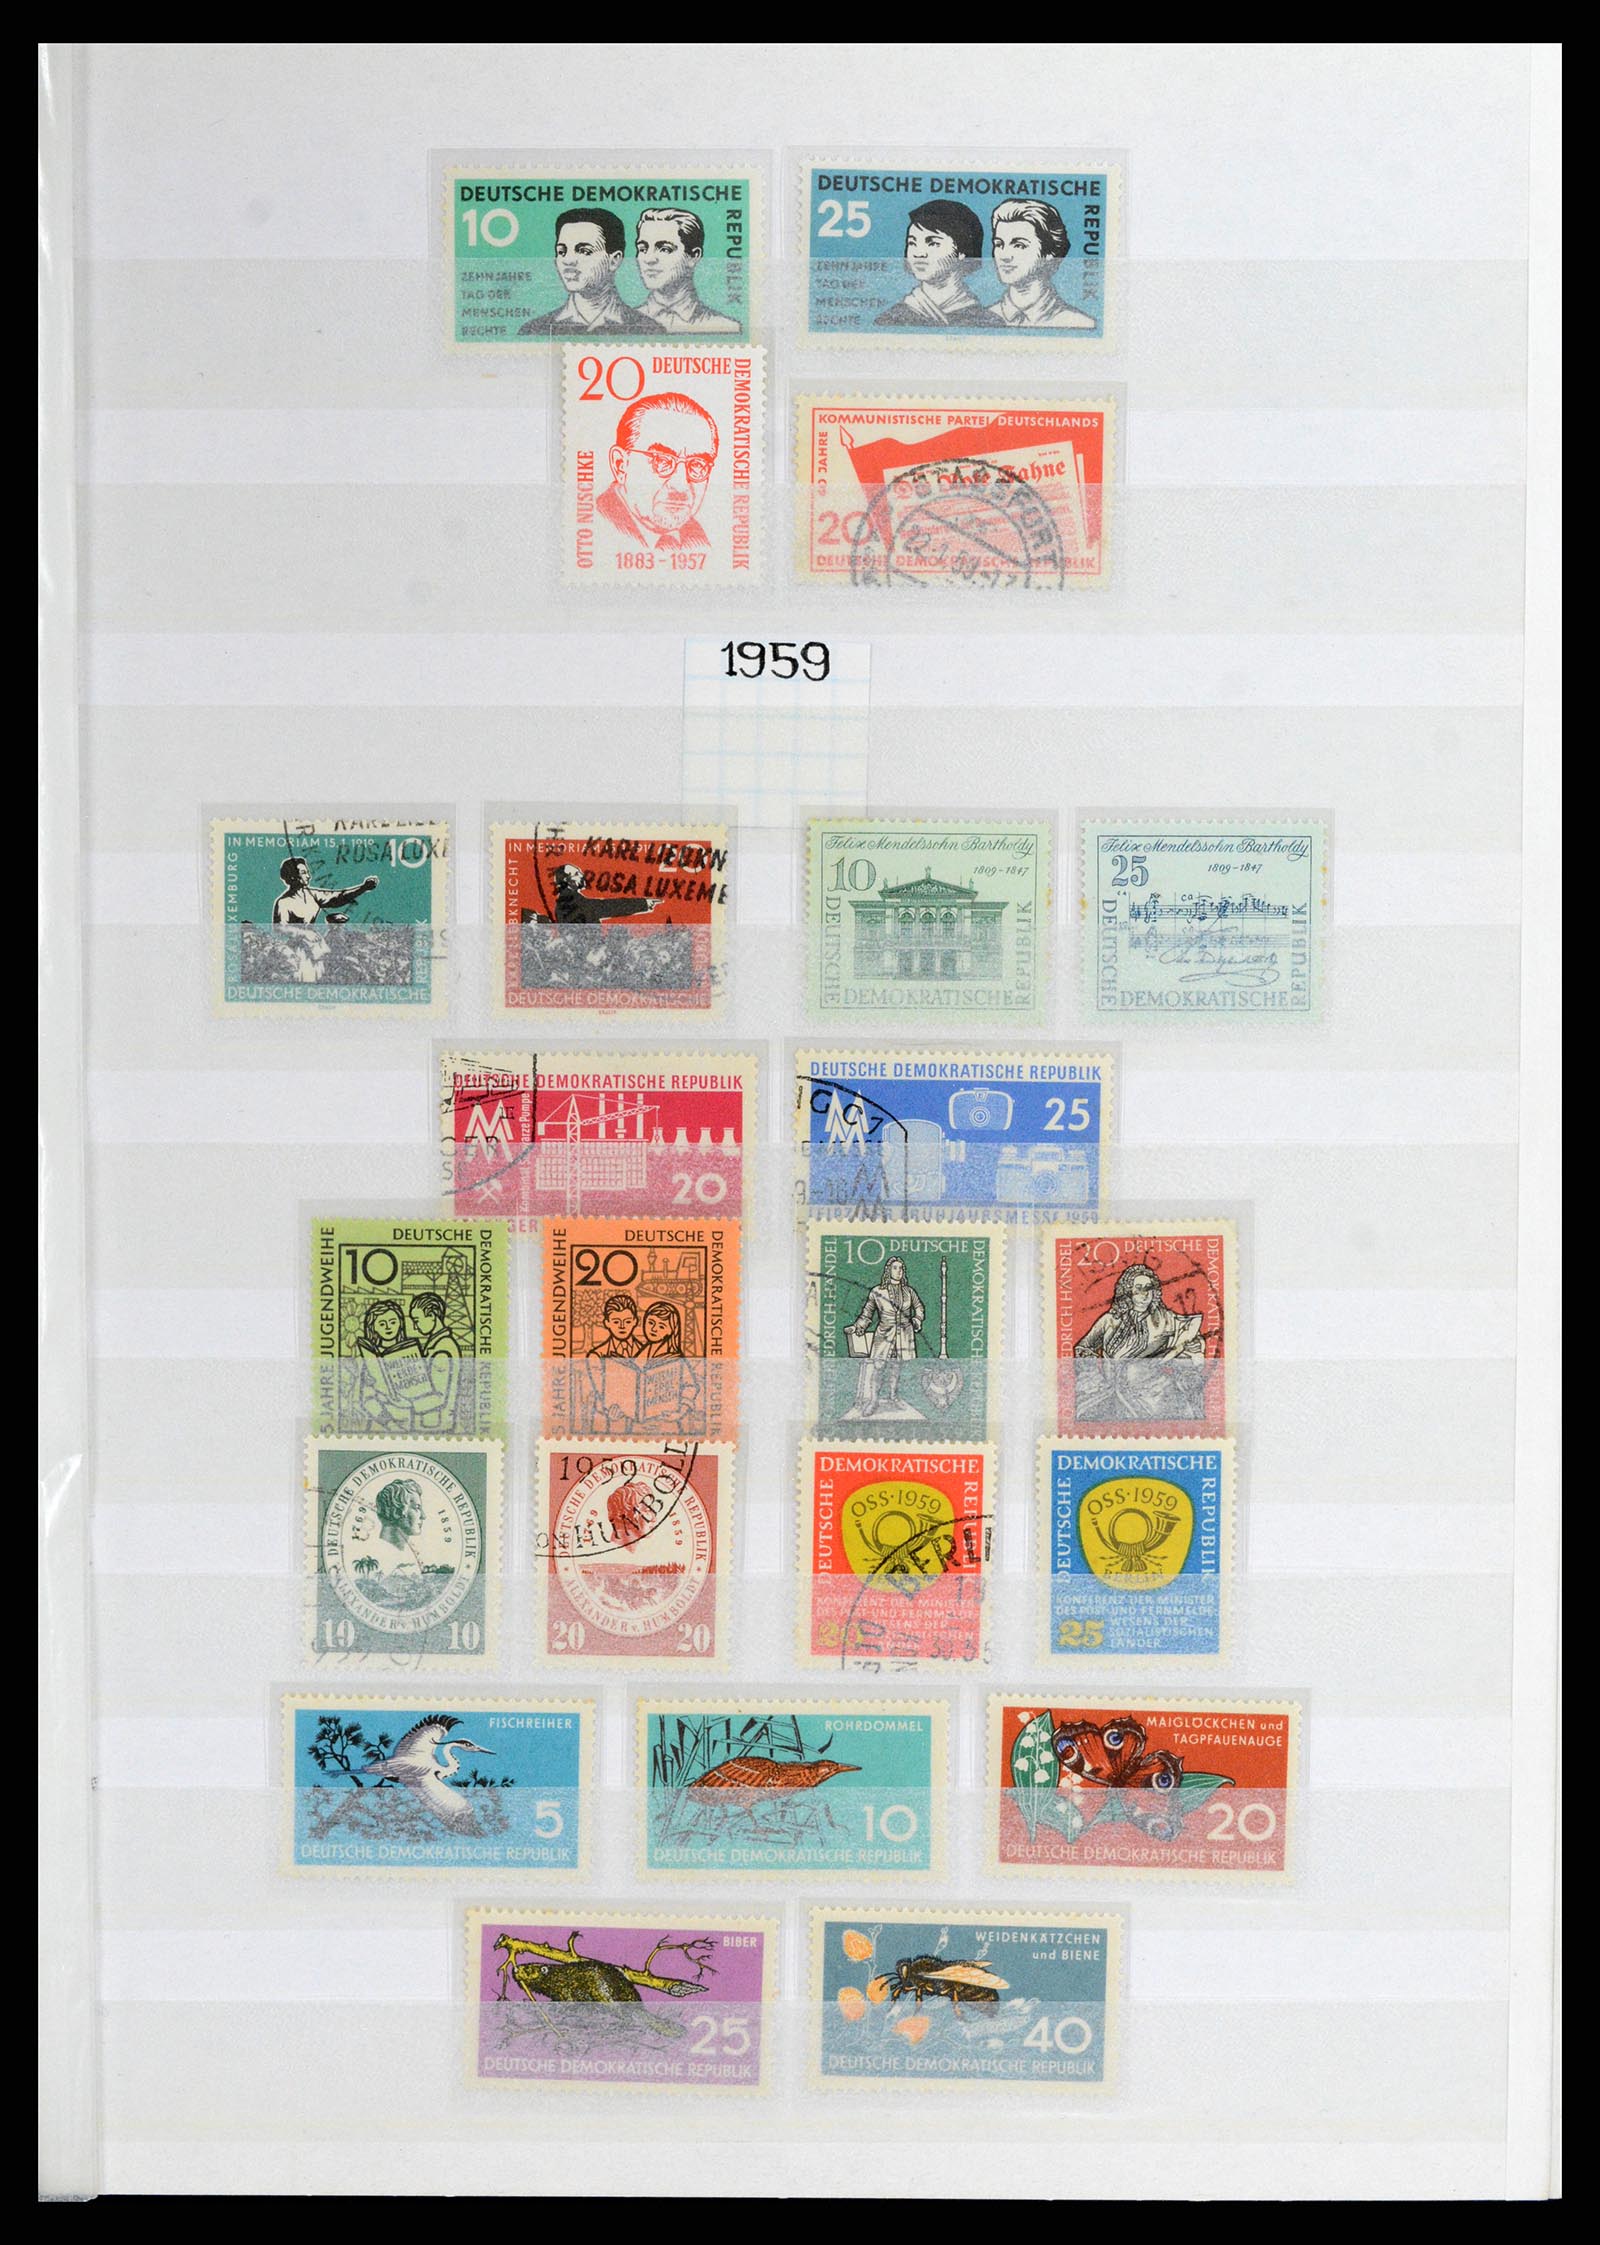 37501 015 - Stamp collection 37501 GDR 1949-1990.